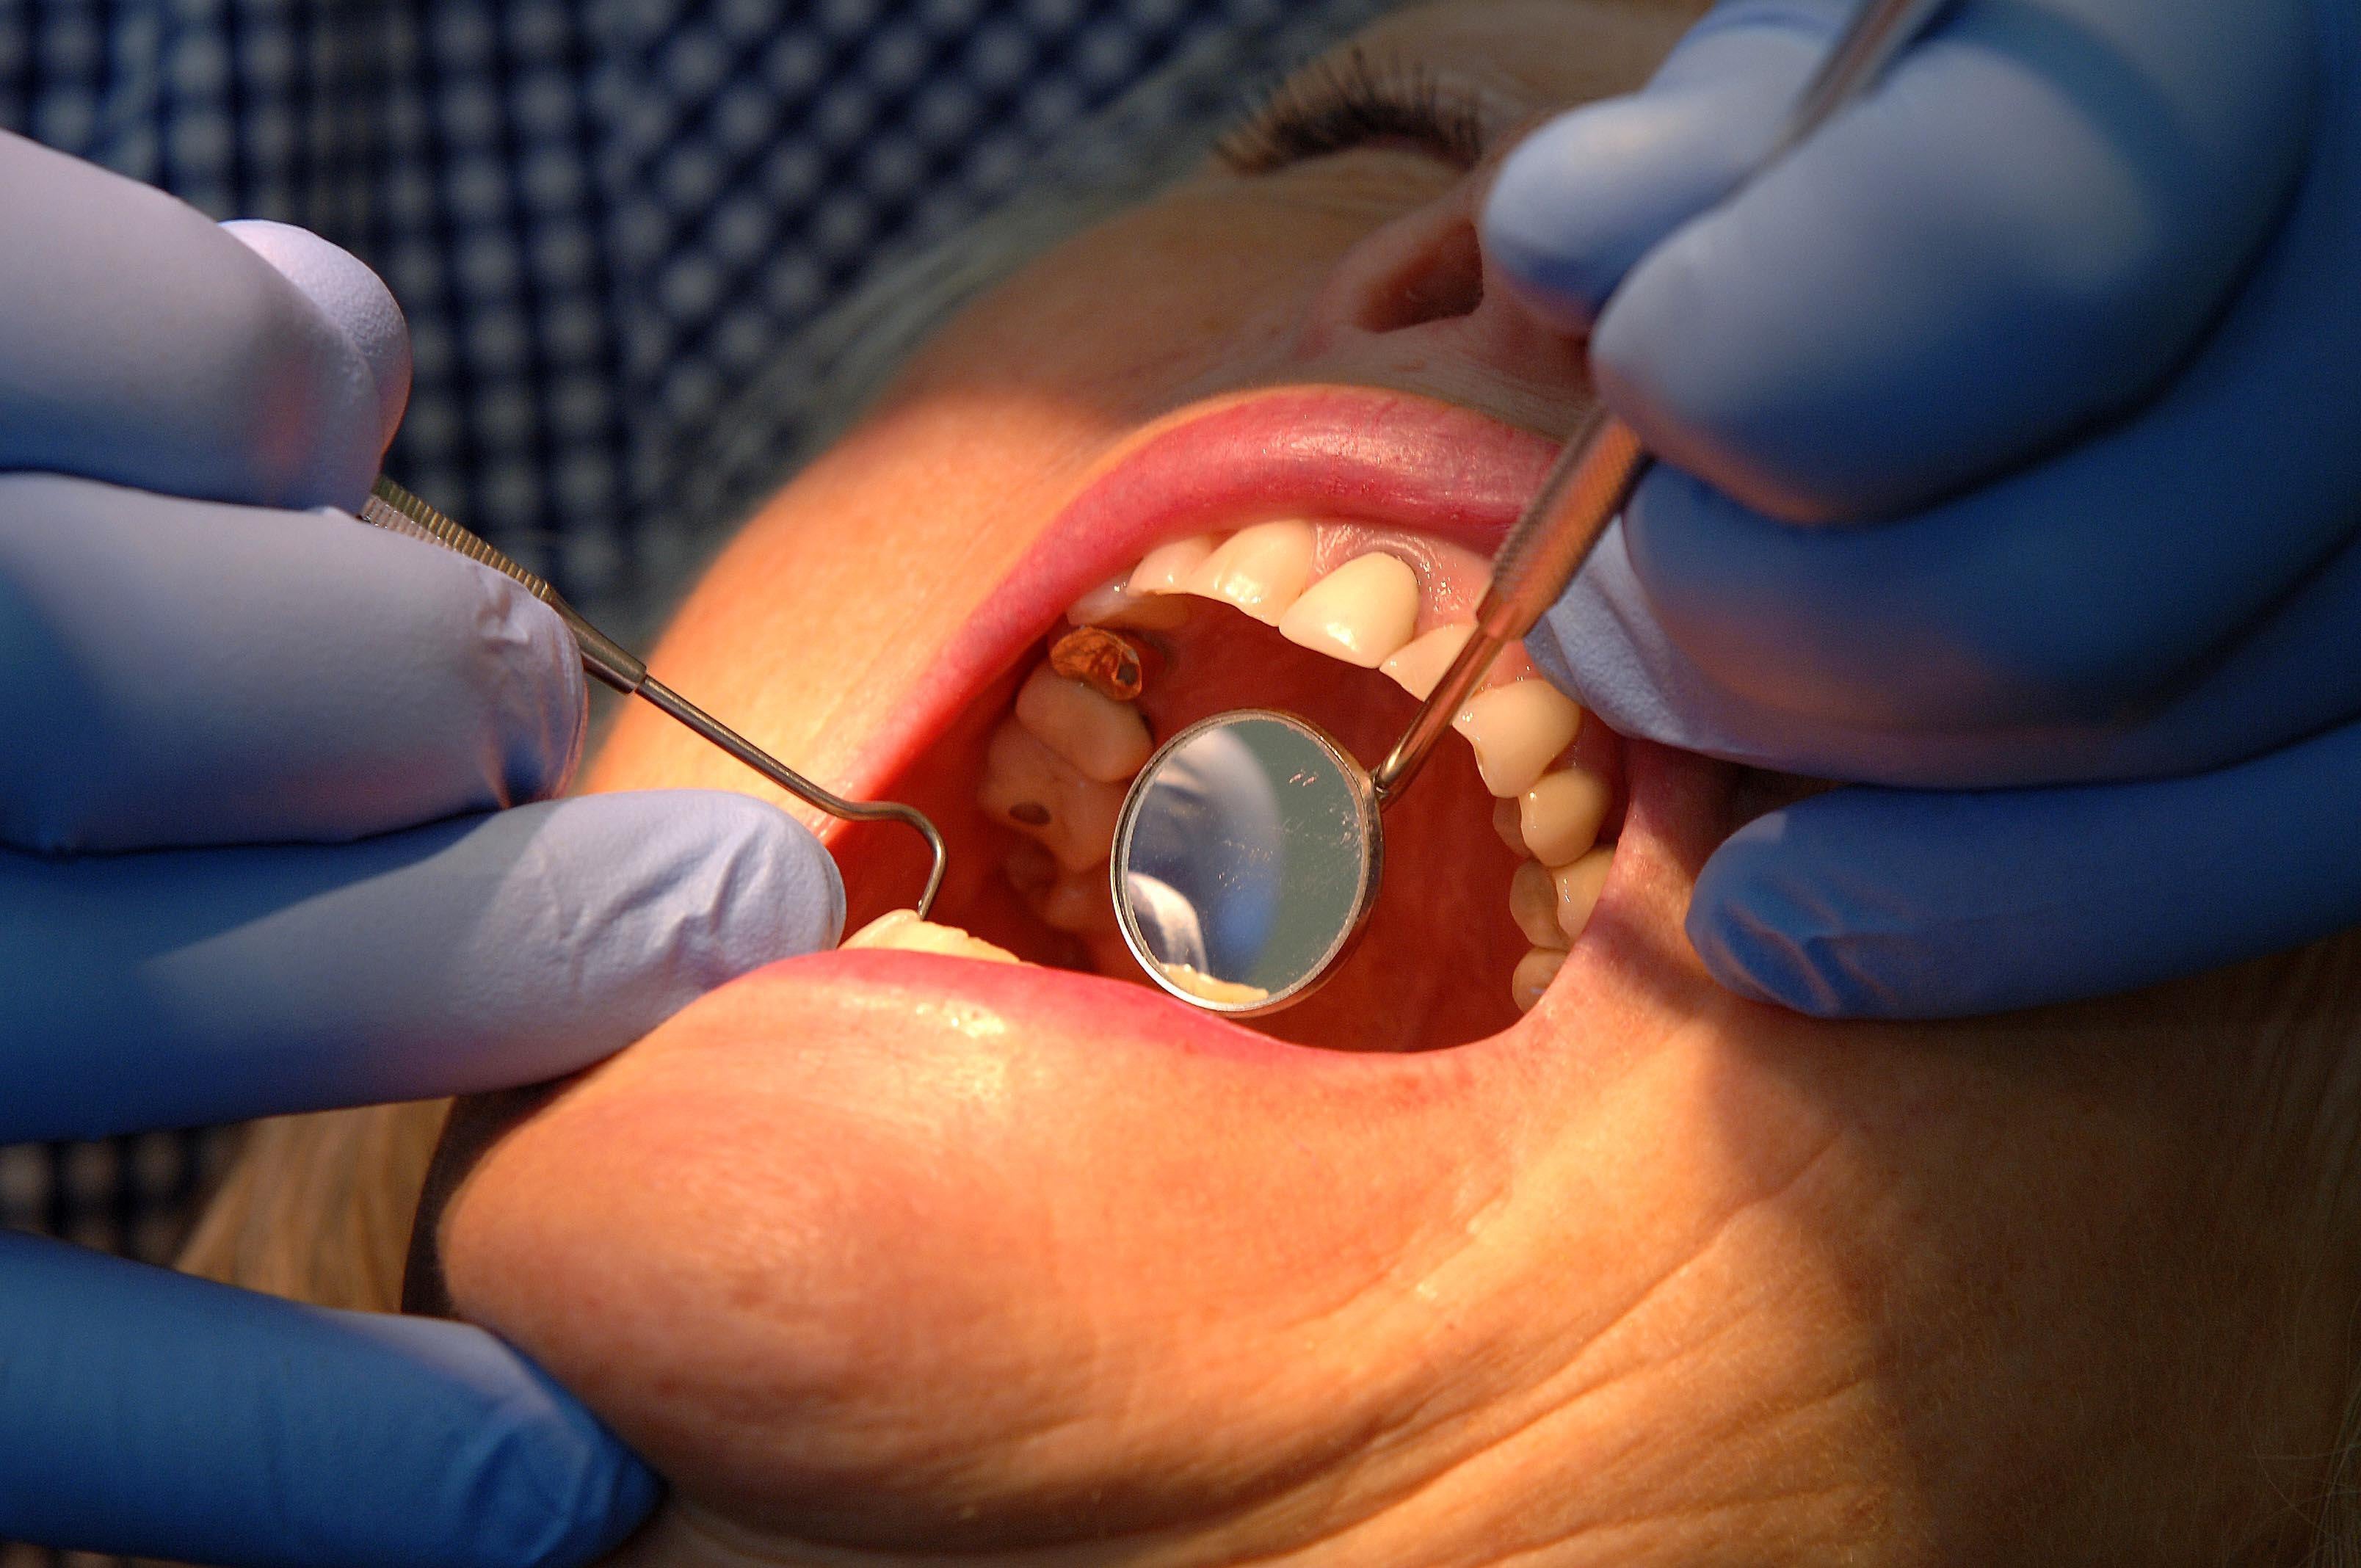 Some patients have reported being unable to find an NHS dentist within a two-hour radius of their home